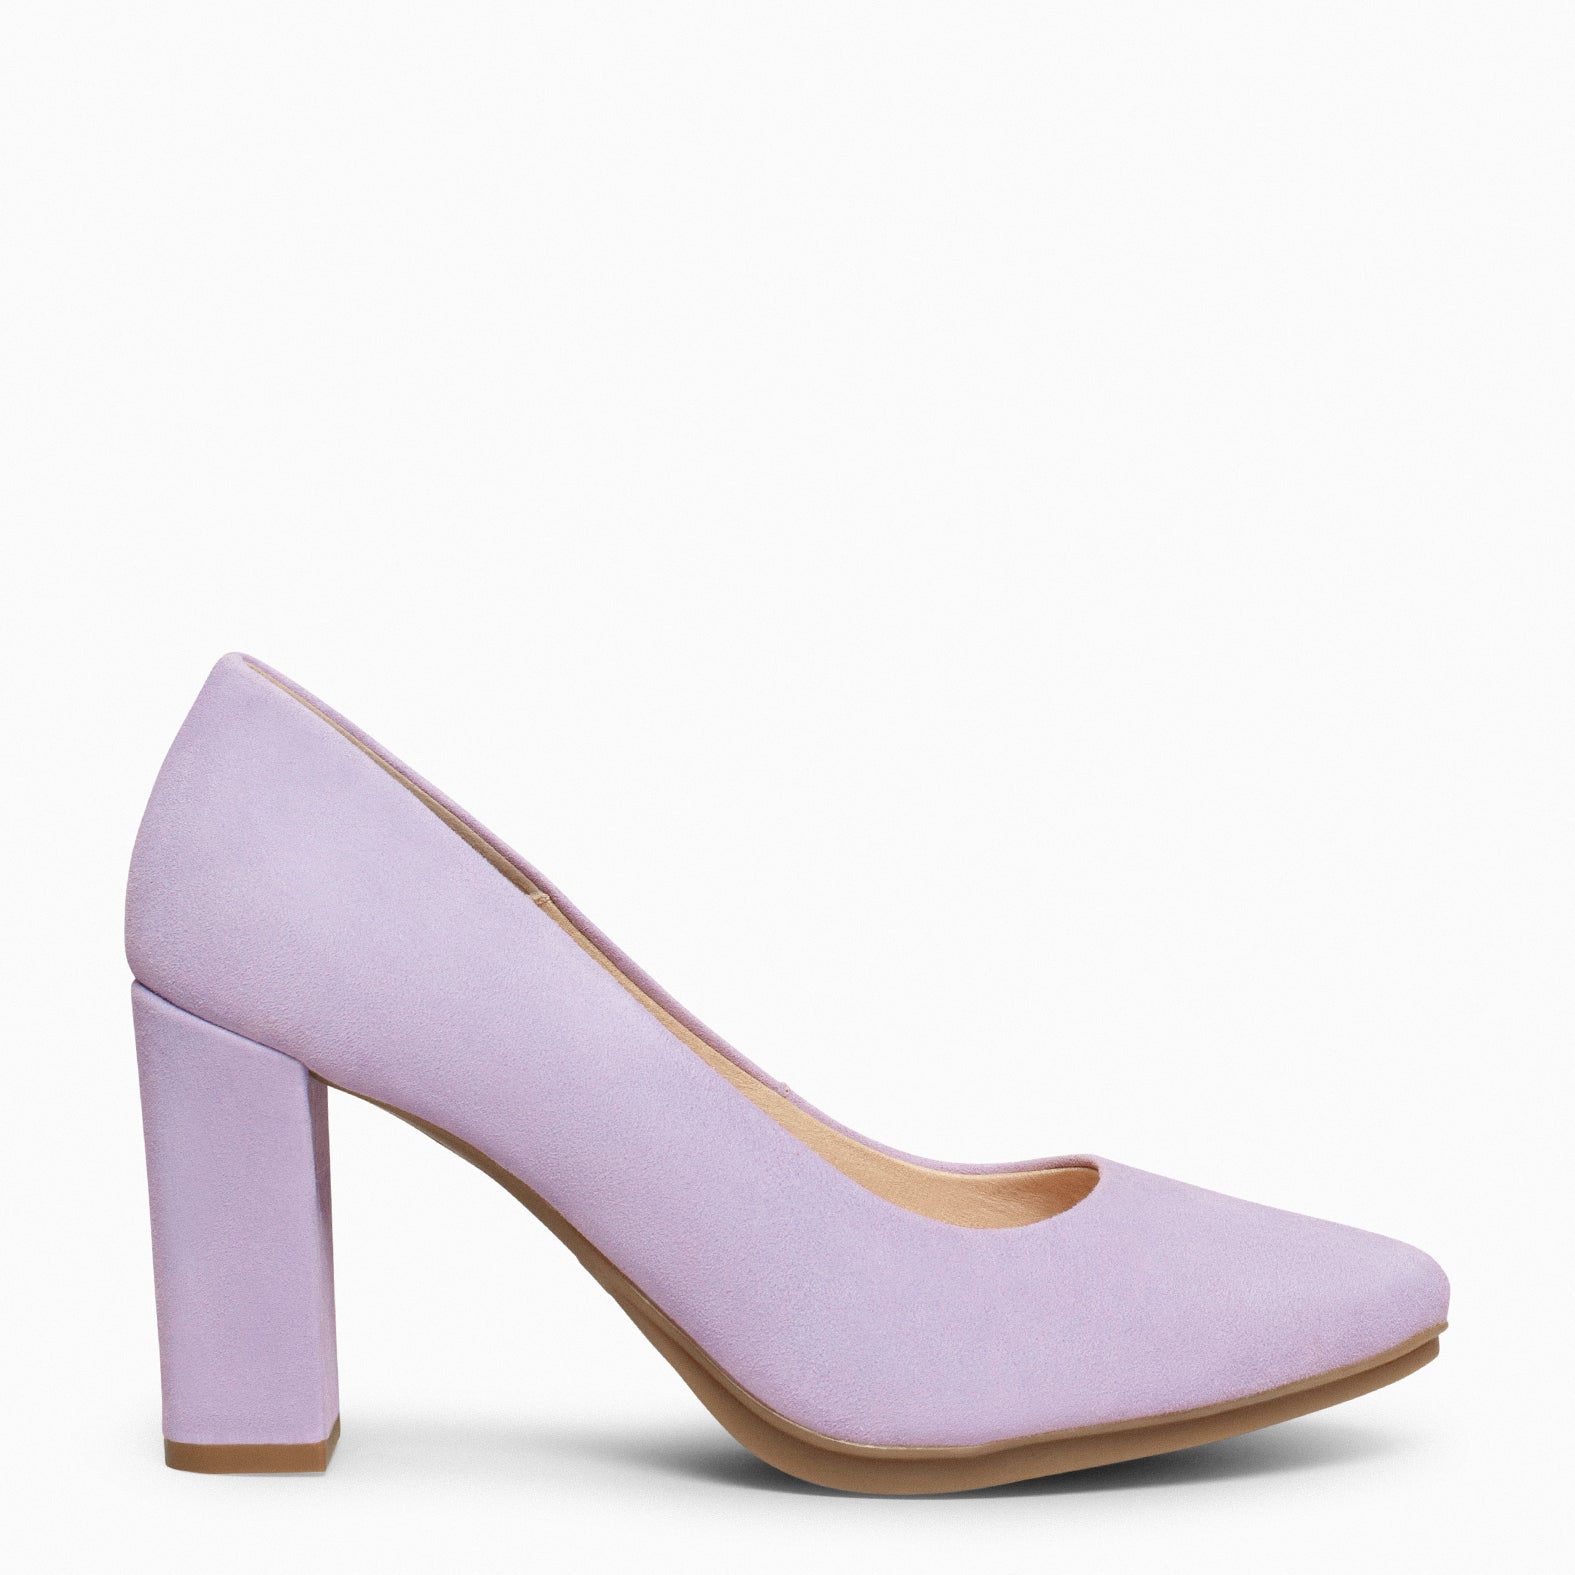 URBAN – LILAC Suede high-heeled shoes 